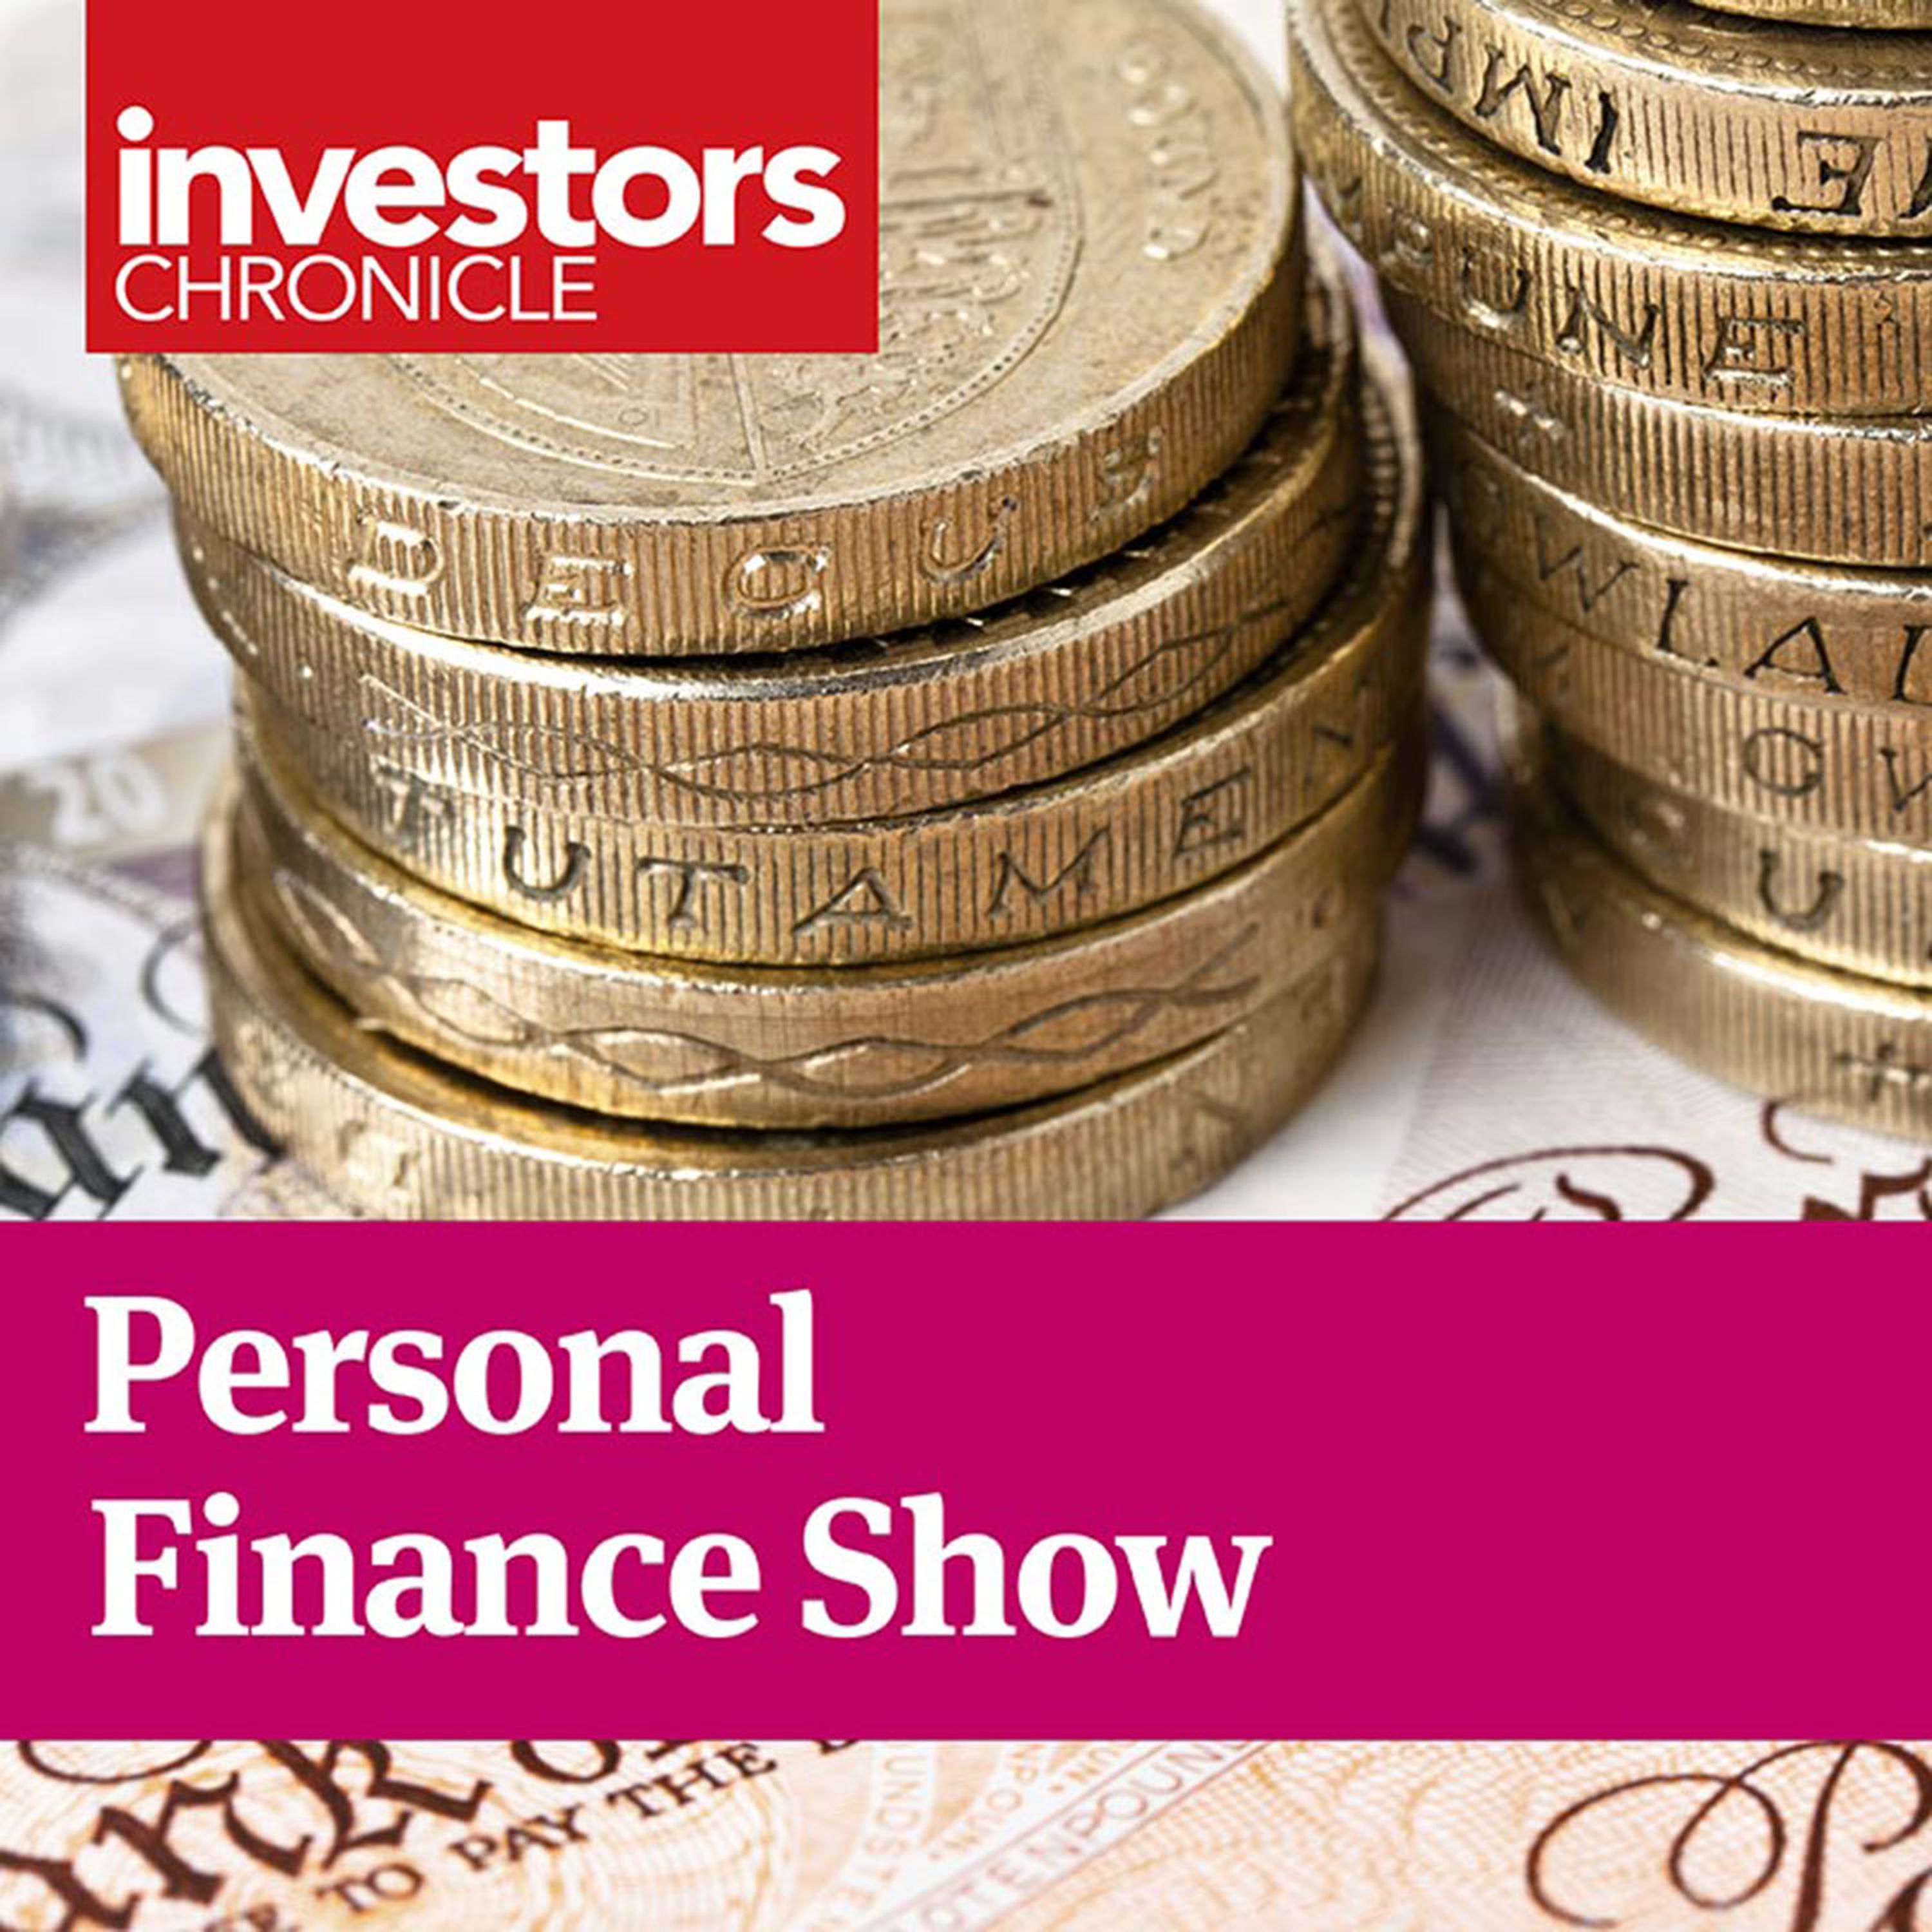 Personal Finance Show: Best value in developed markets and income amid adversity